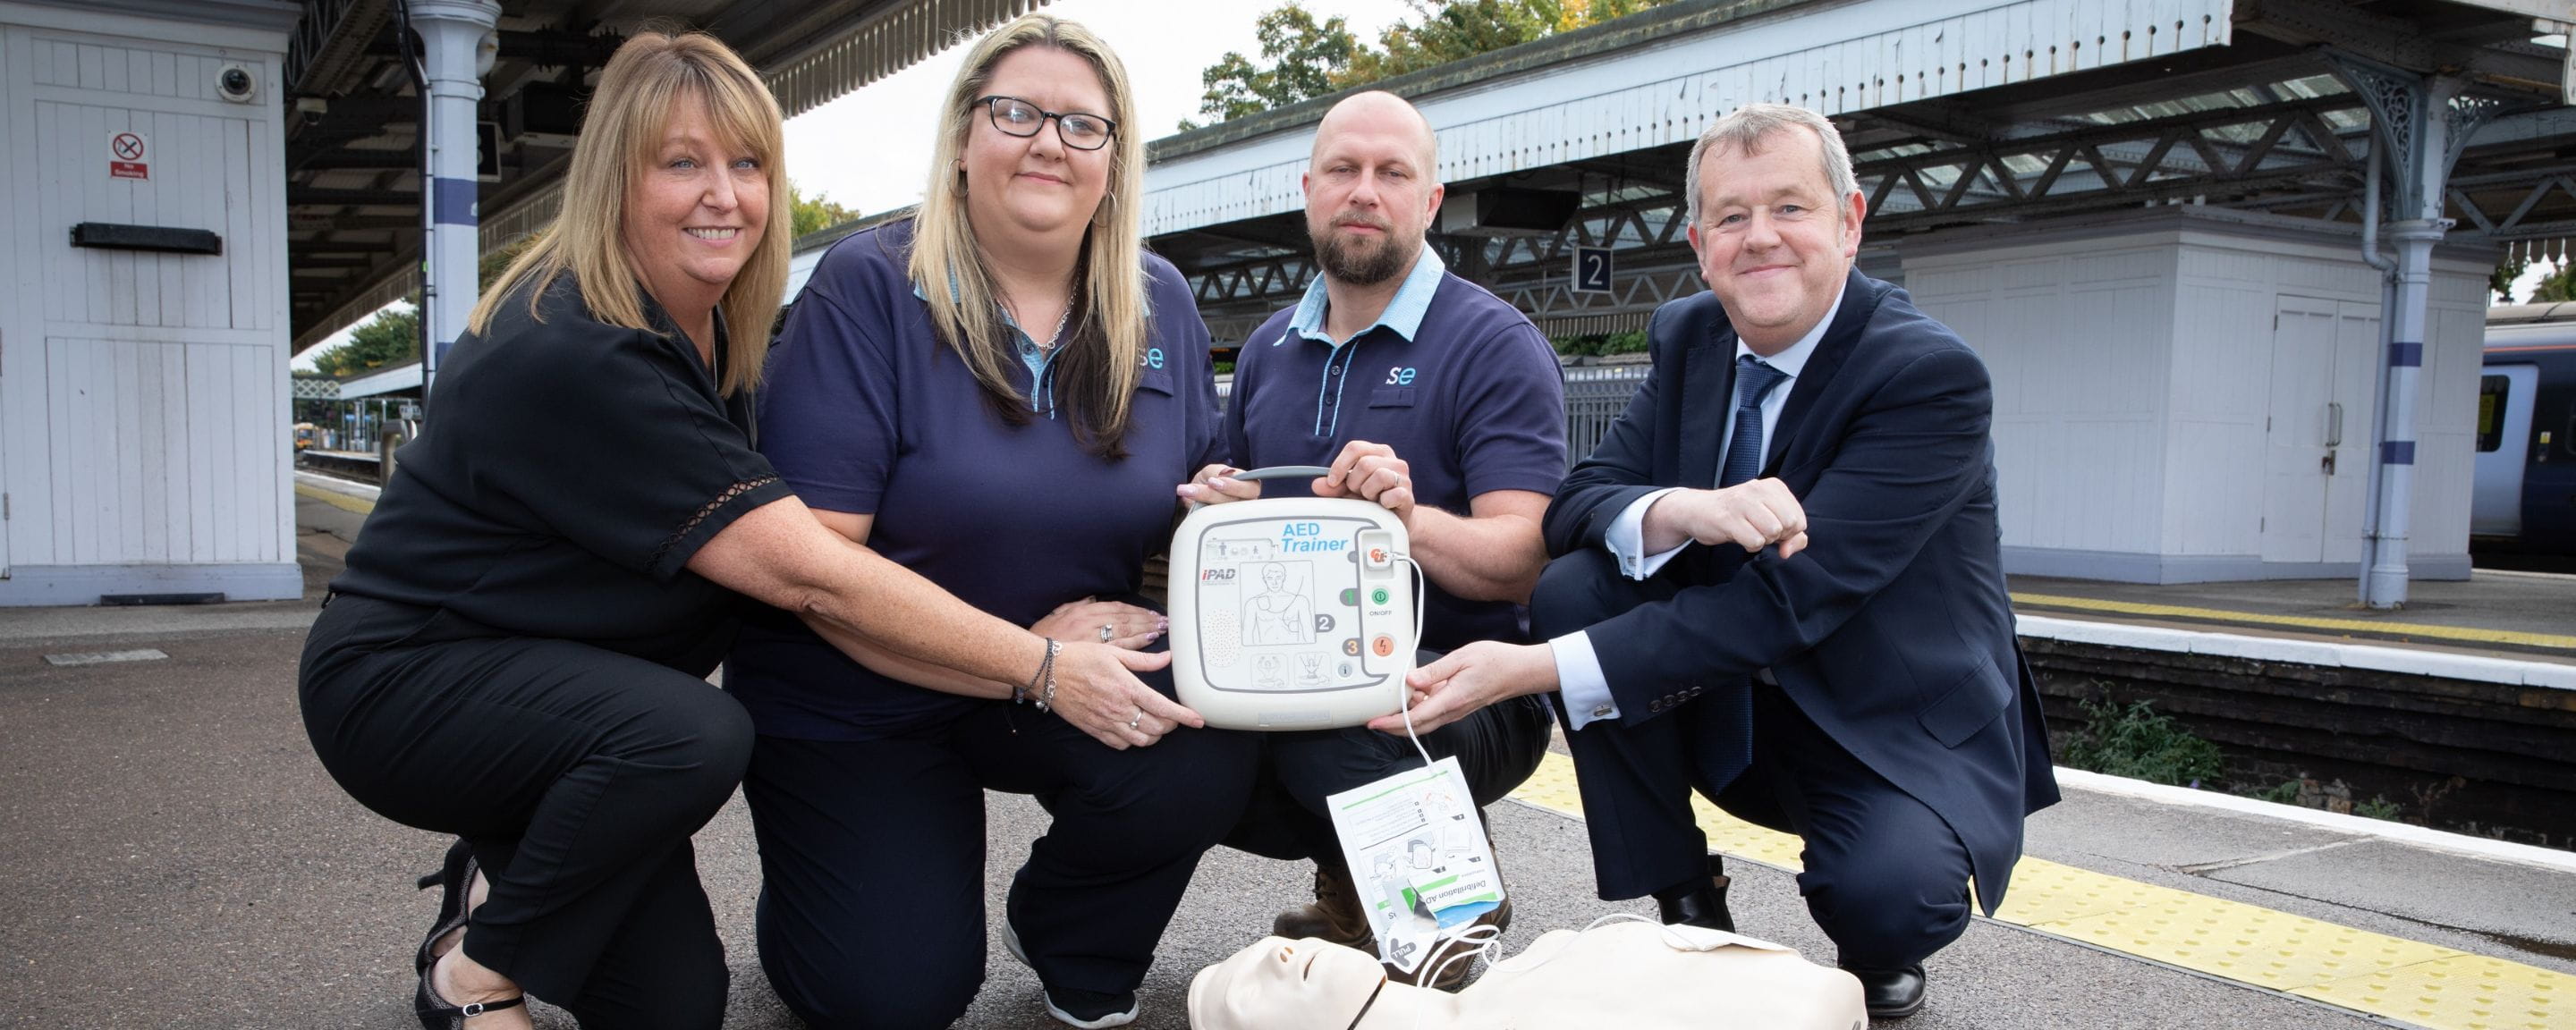 Southeastern staff at a station holding an AED defibrillator